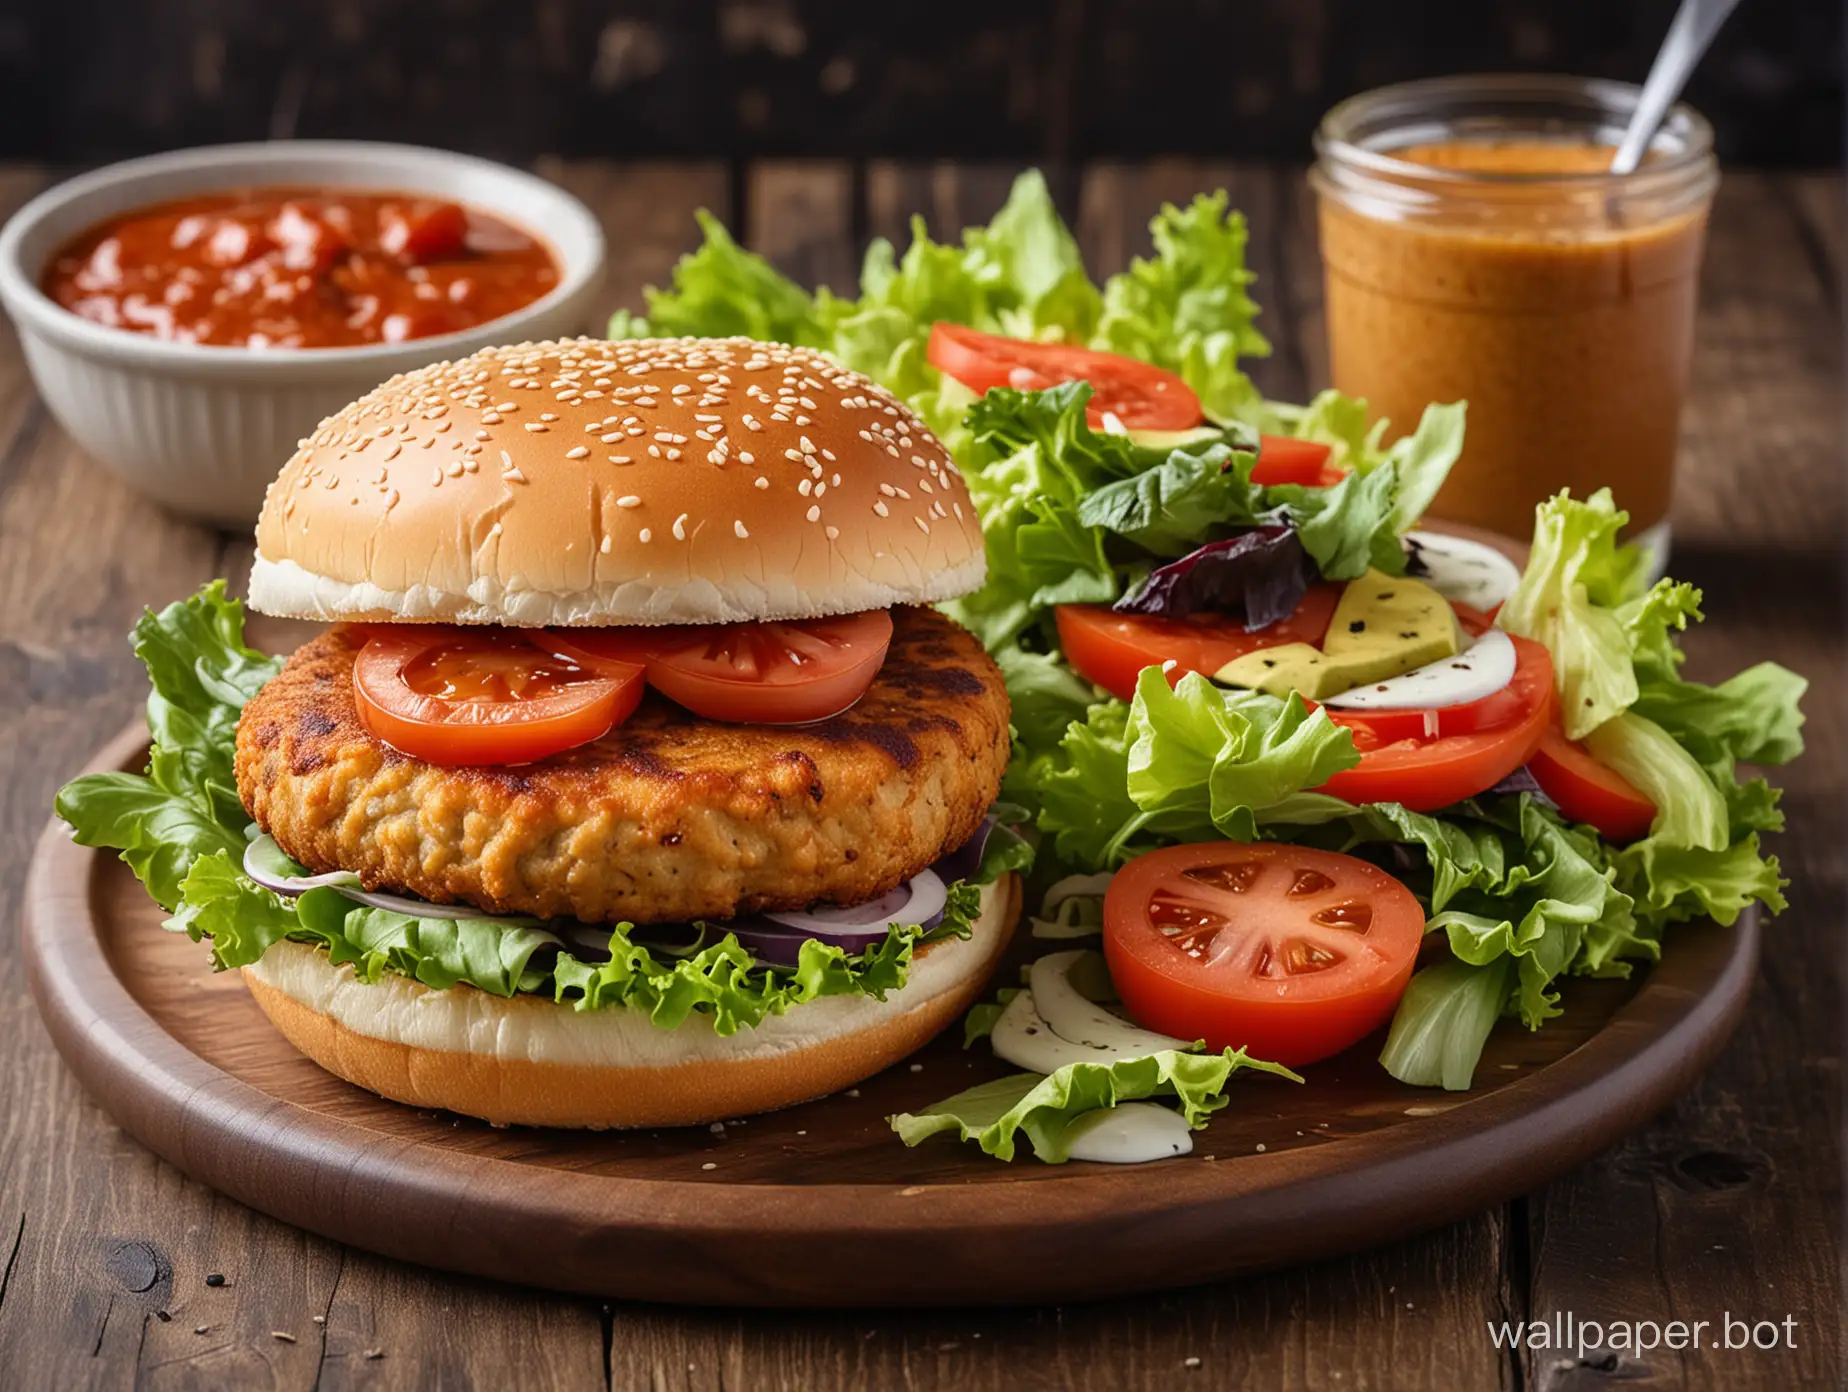 Gourmet-Chicken-Cutlet-Burger-with-Fresh-Salad-Dressing-and-Savory-Tomato-Sauce